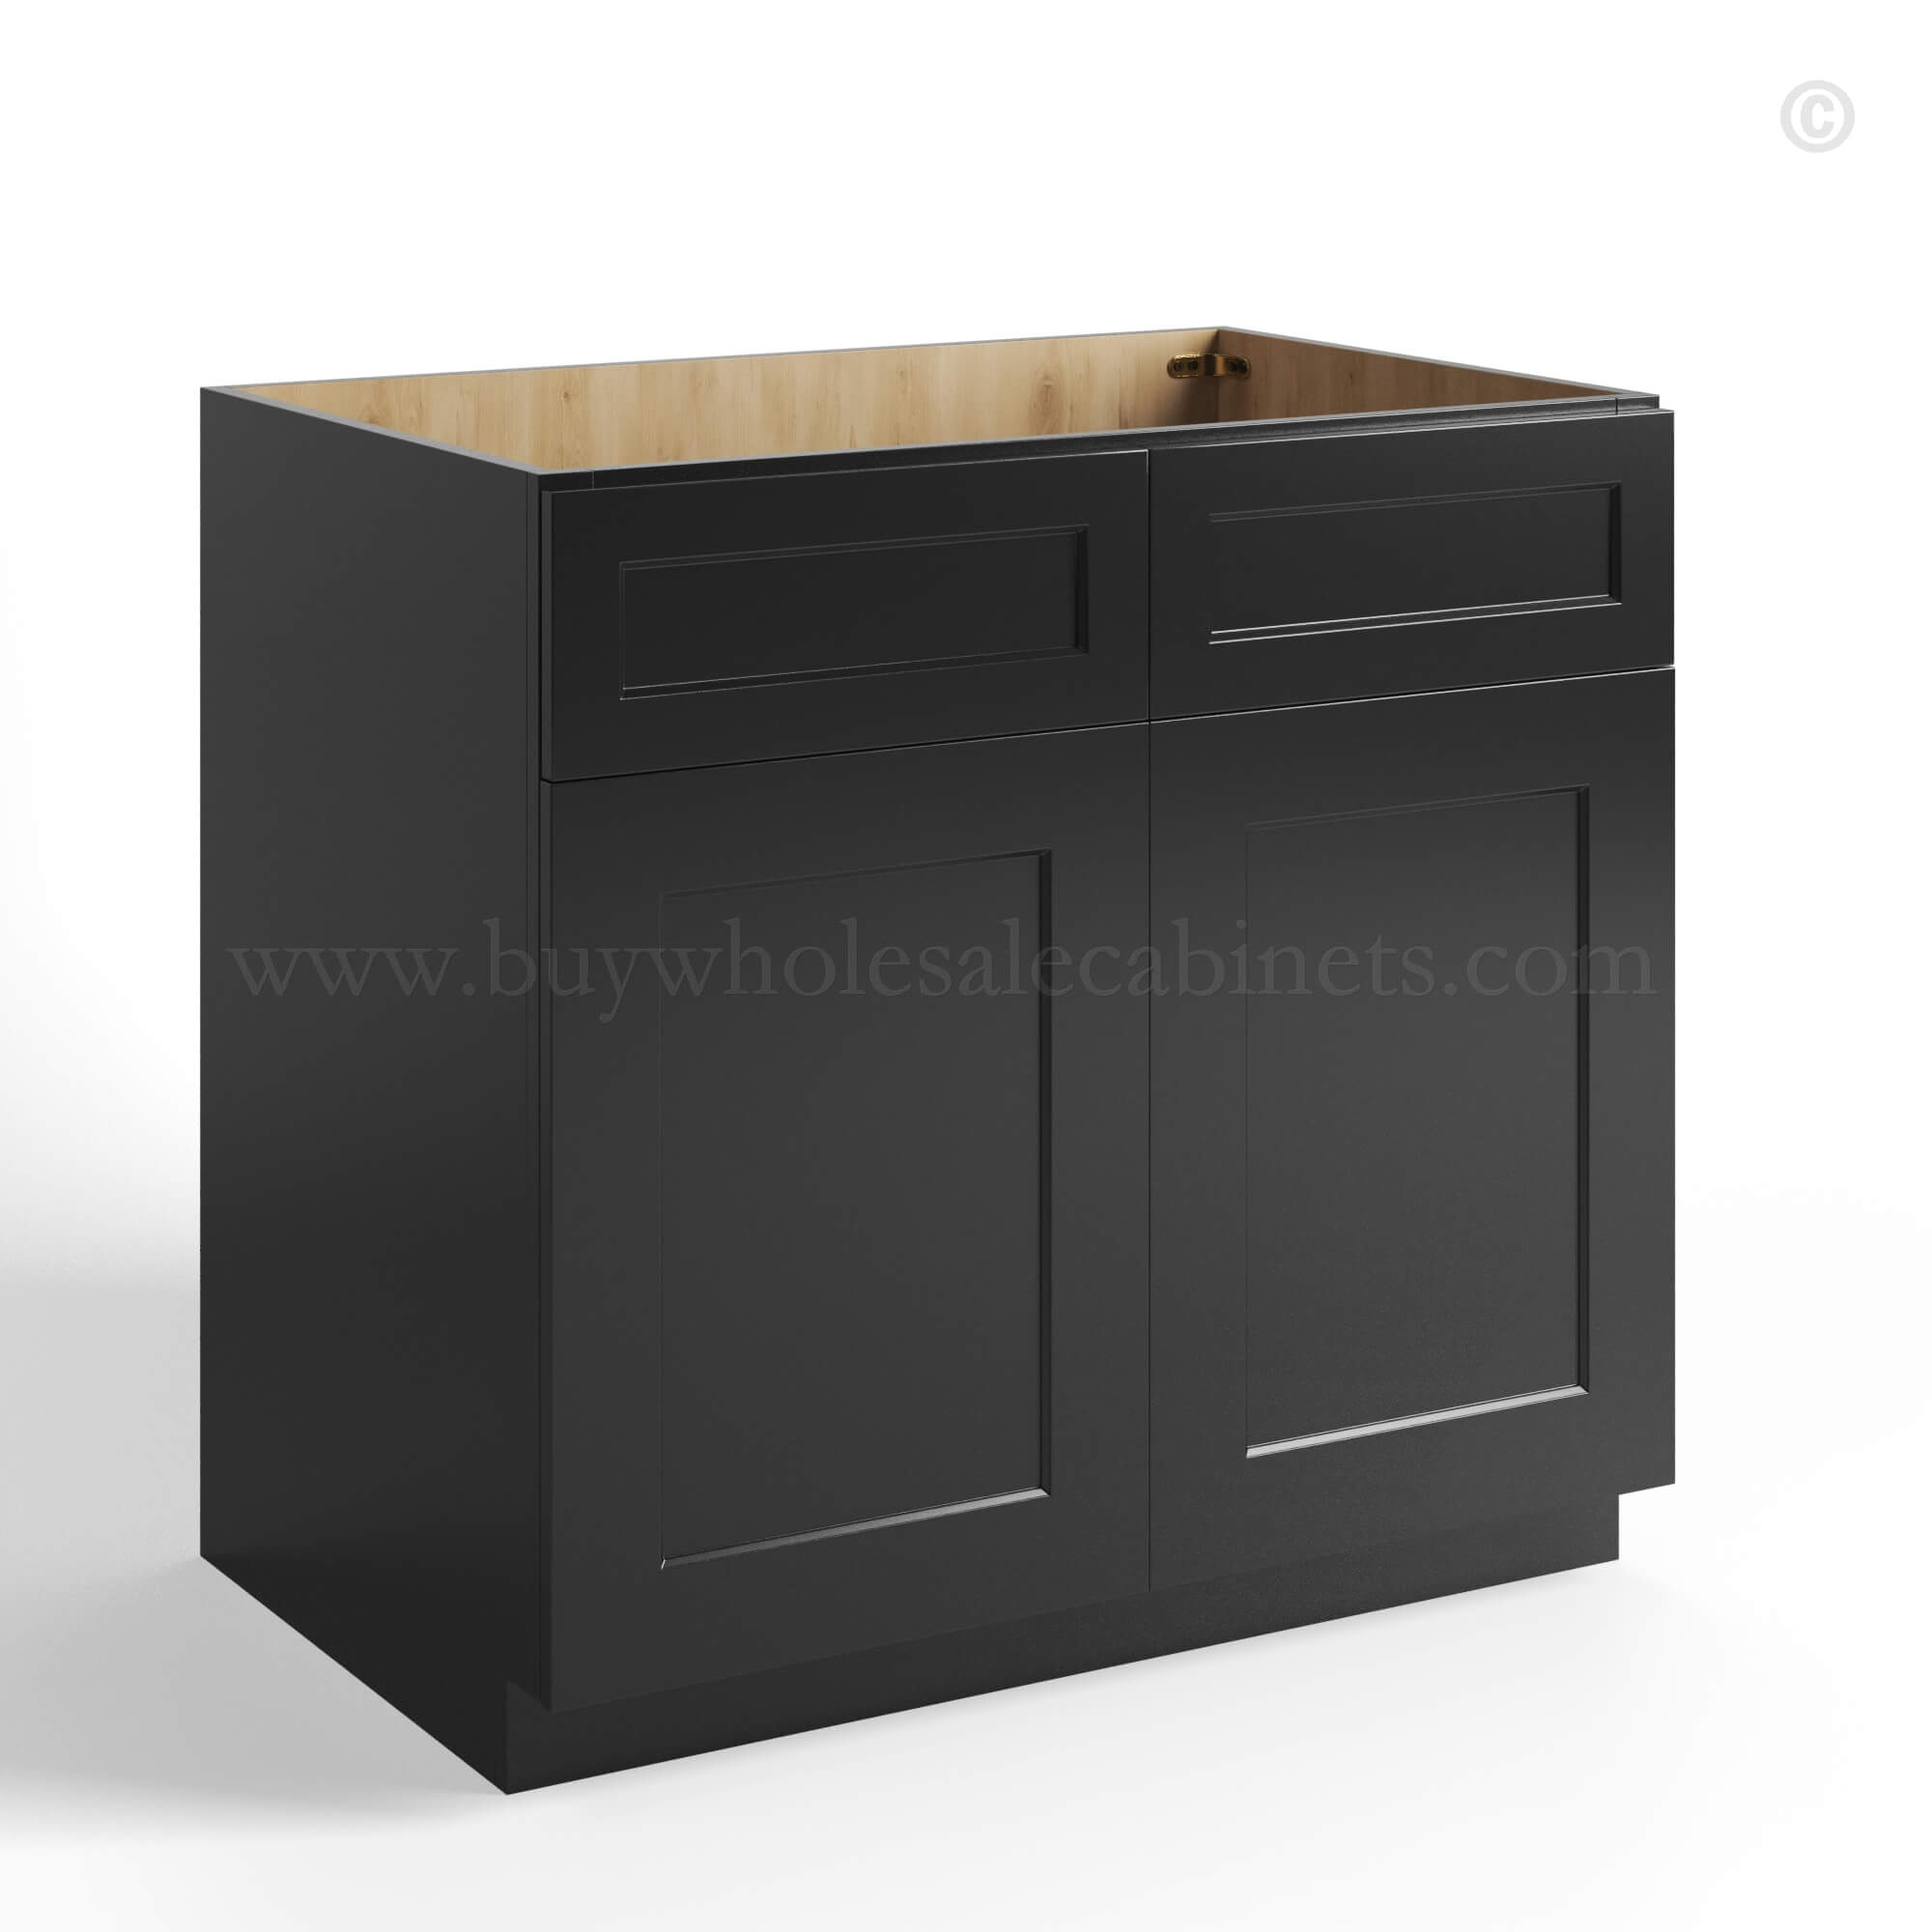 black shaker sink base cabinet with two doors and two false drawers, rta cabinets, wholesale cabinets